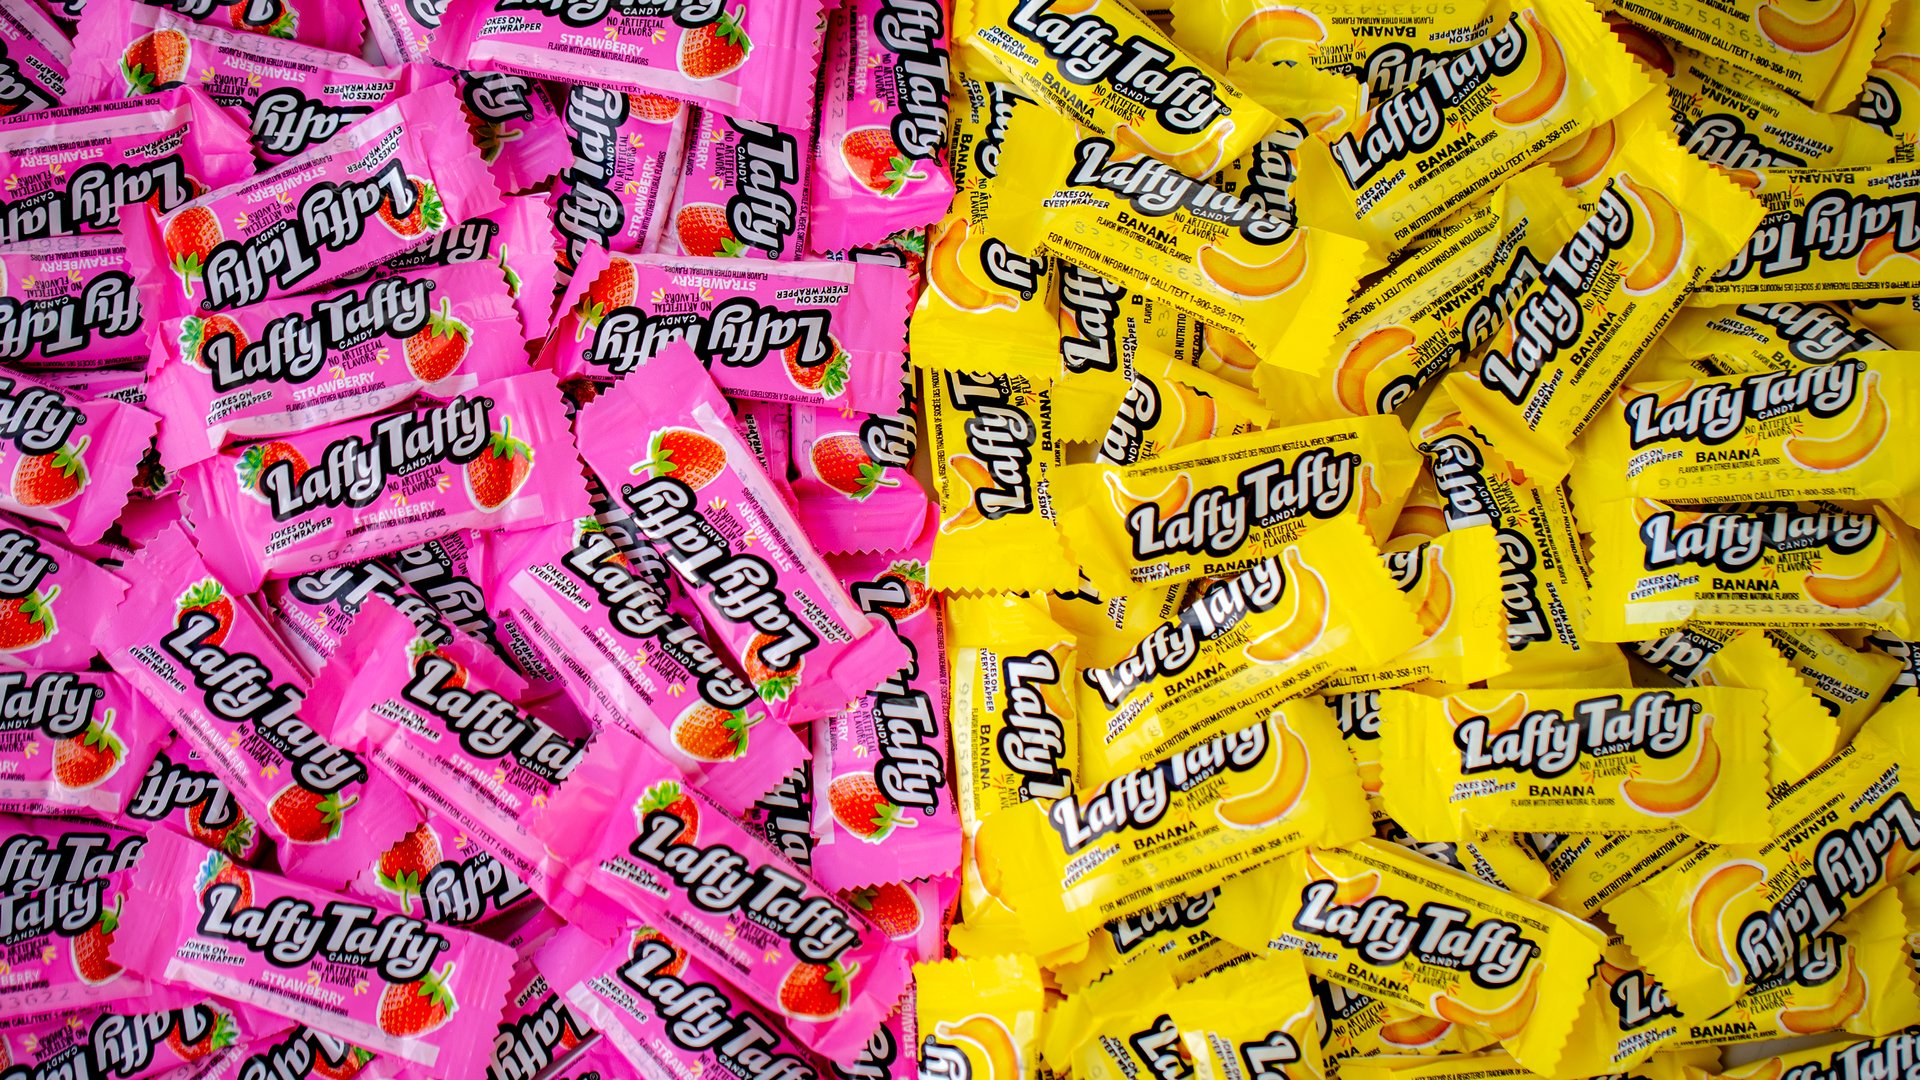 Laffy Taffy may be mini, but these Laffy Taffy are bursting with chewy, fruity flavor and a joke on every wrapper!